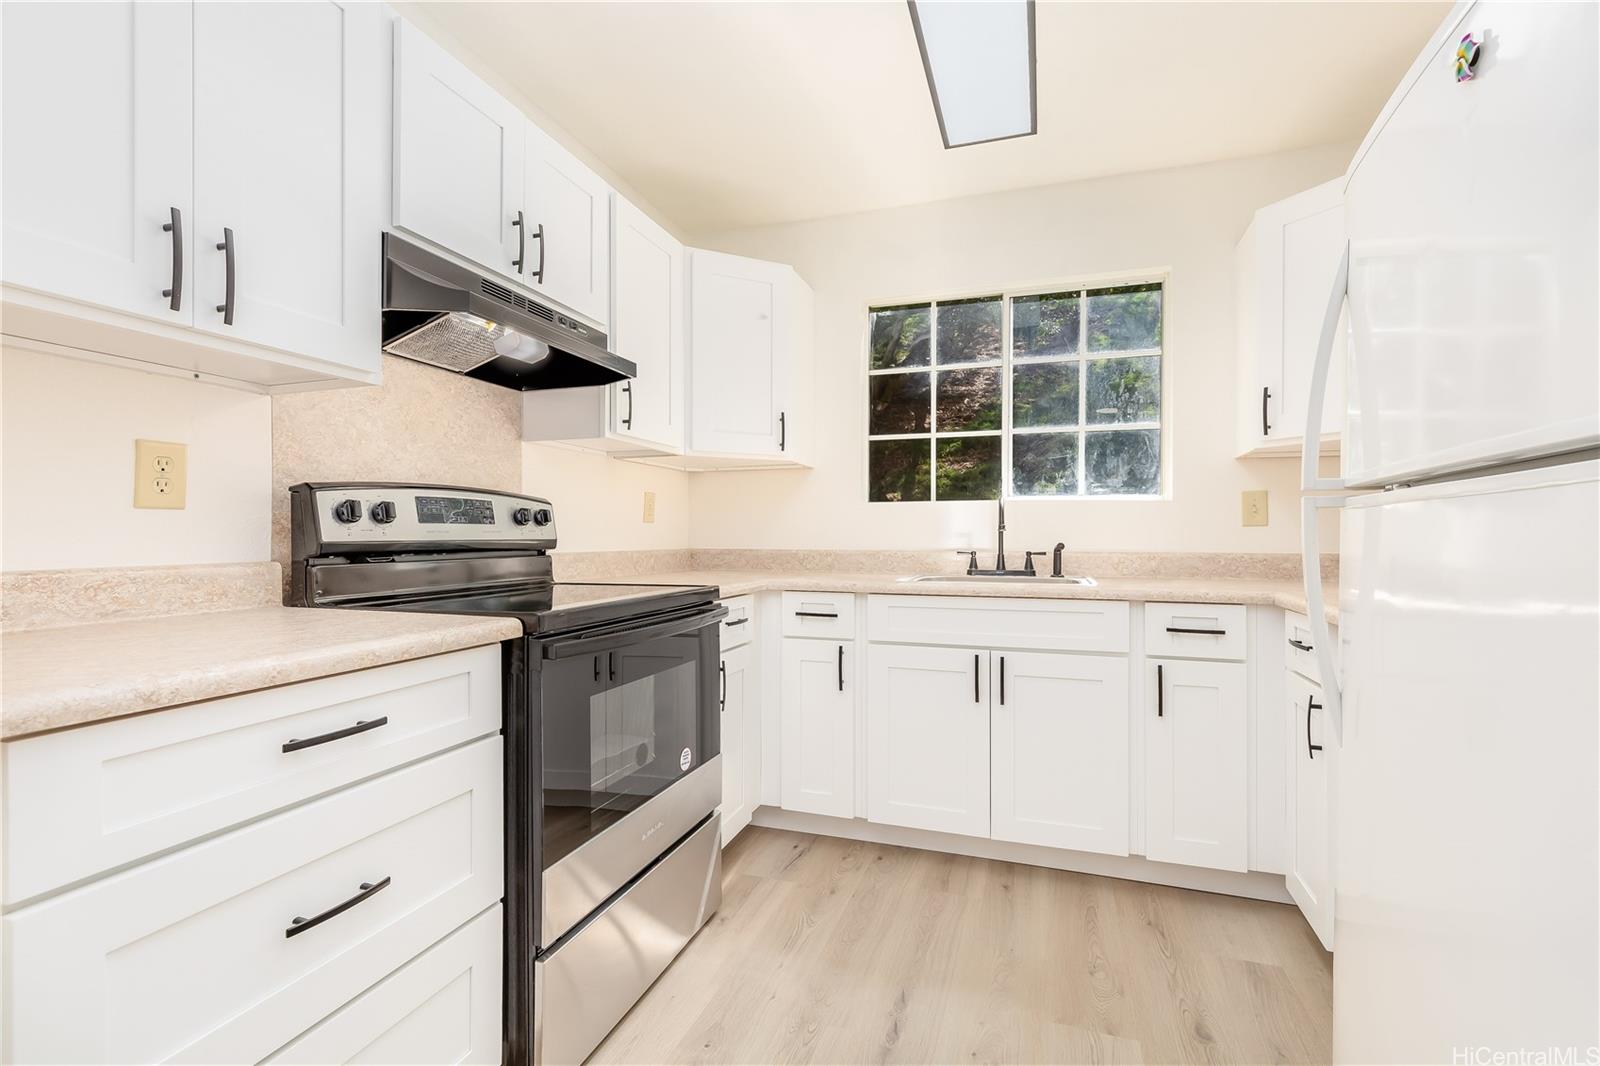 Come home & enjoy this well- appointed cook’s kitchen.